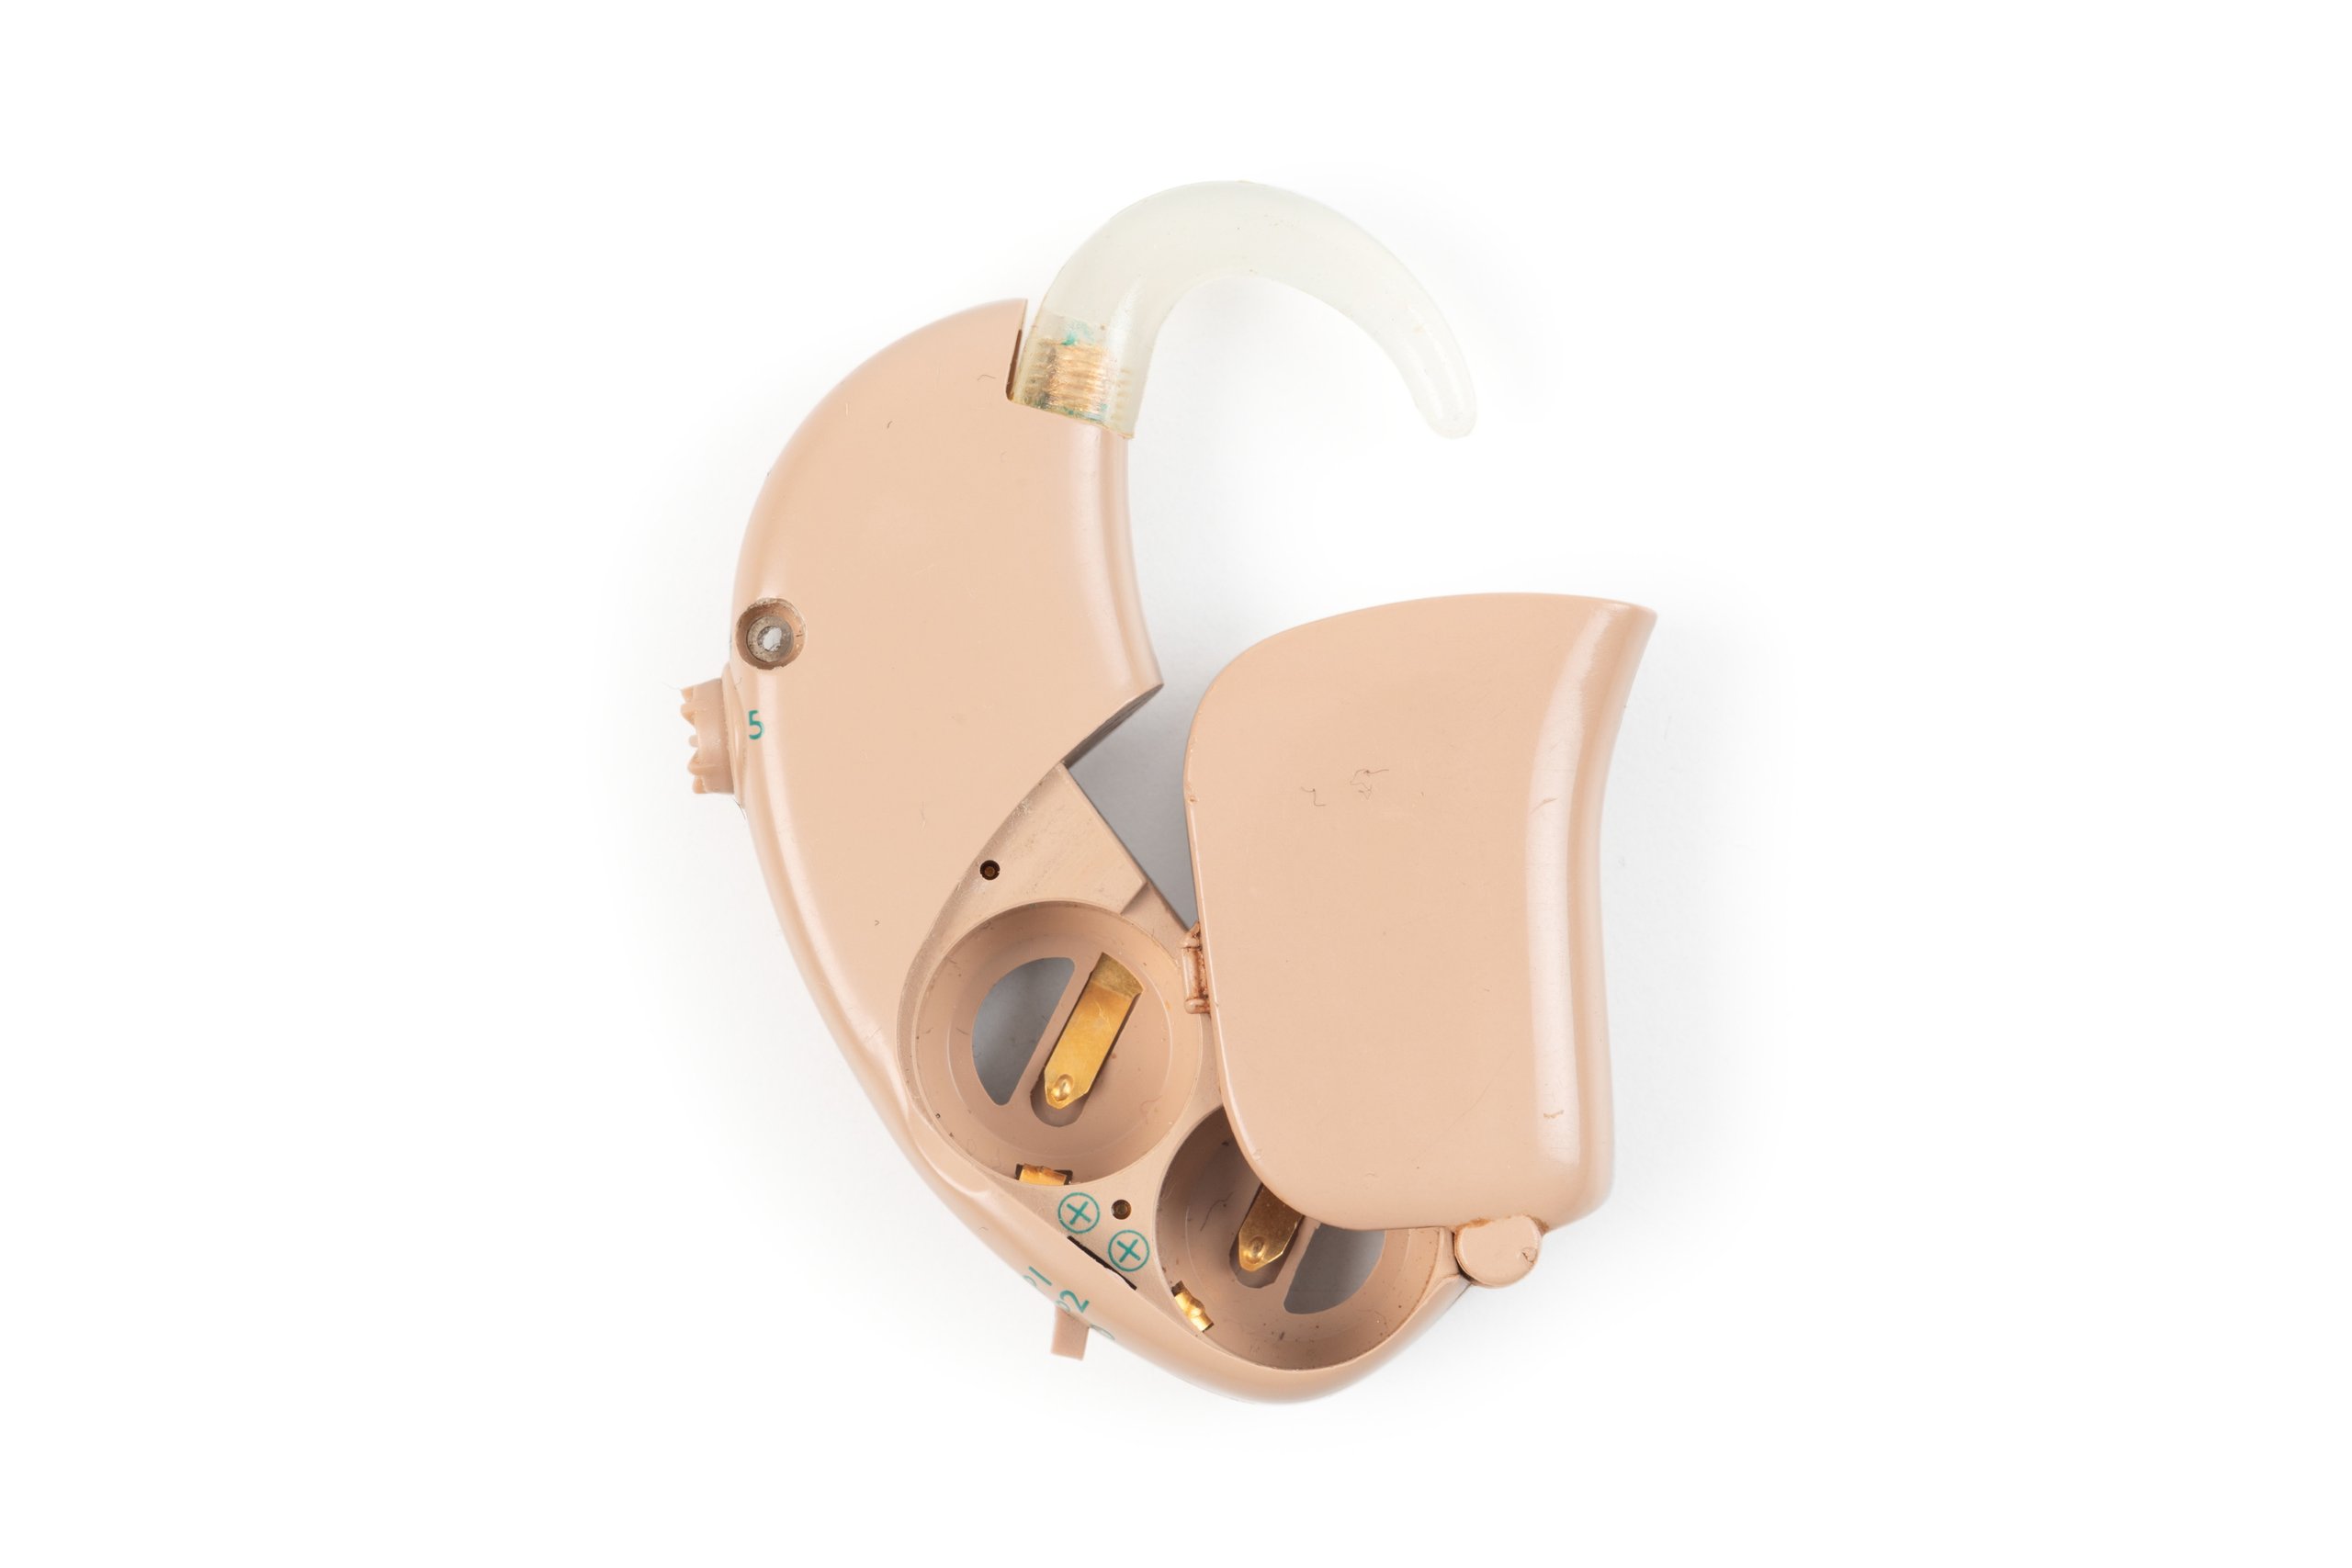 'ESPrit' speech processor by Cochlear Limited